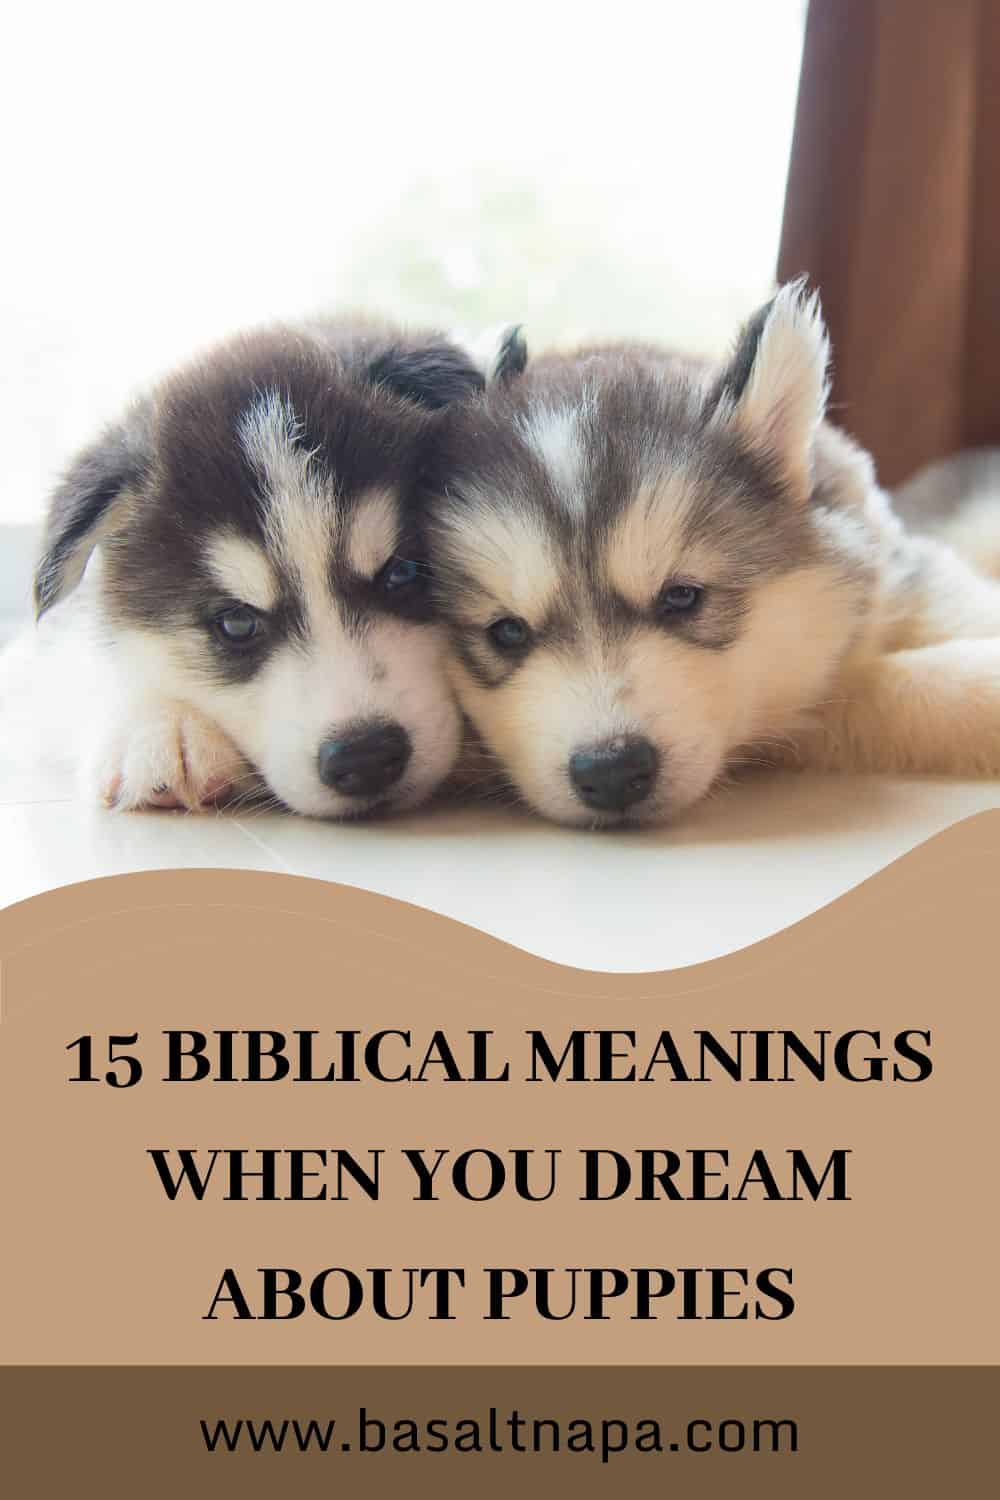 15 Biblical Meanings When You Dream About Puppies